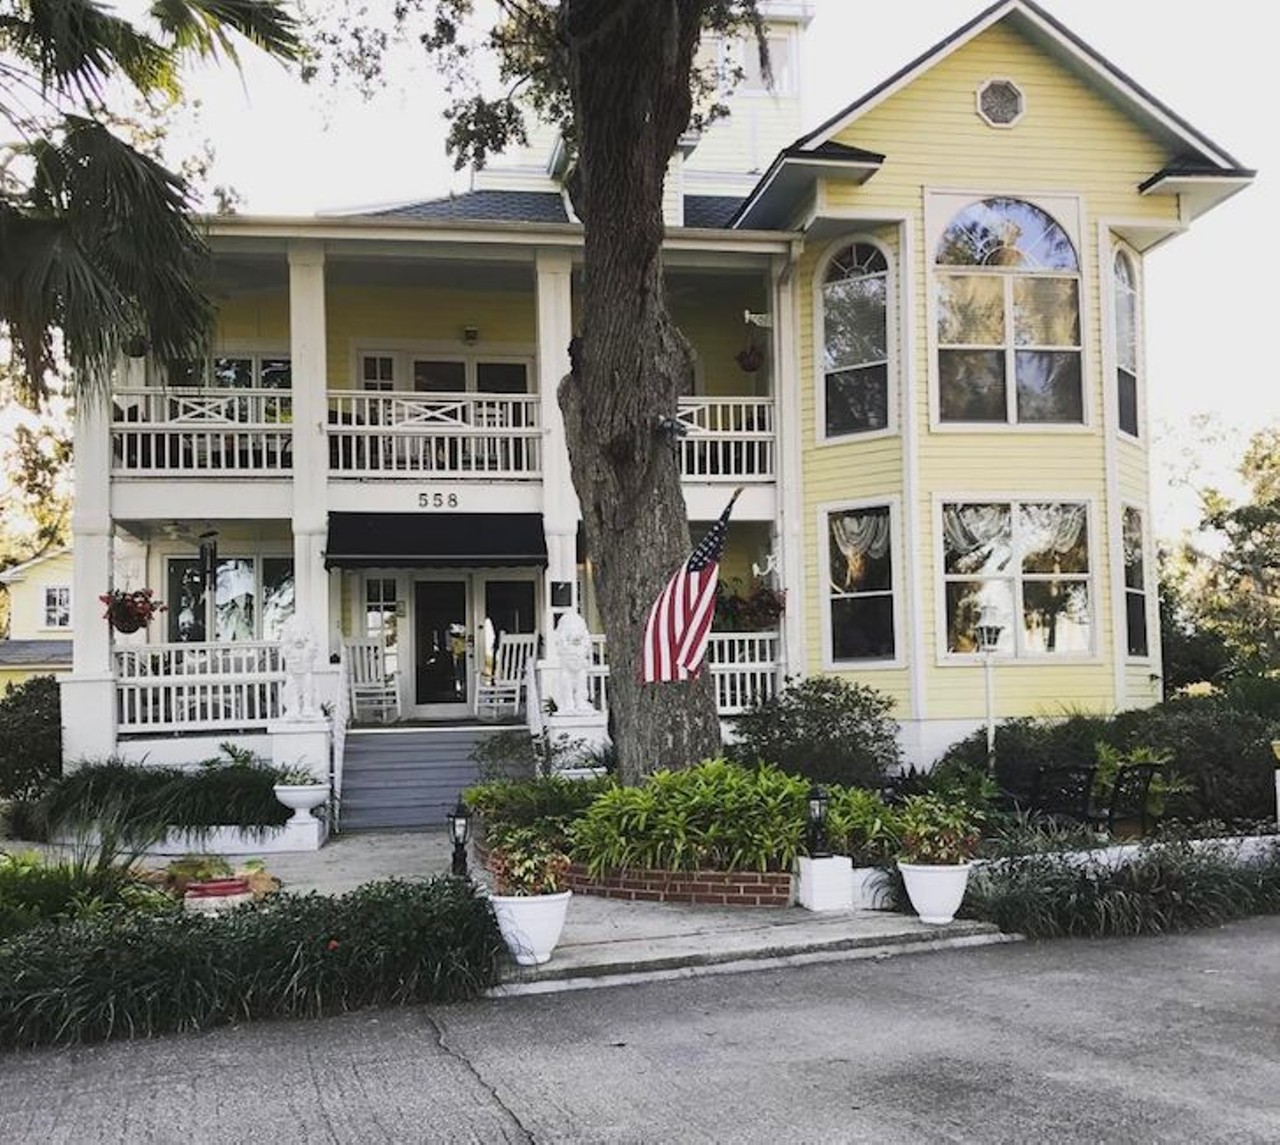 River Lily Inn Bed and Breakfast 
558 Riverside Drive, Daytona Beach, 386-253-5002
Estimated drive time from Orlando: About 1.5 Hours
Cost per night: $129-$235 
Guests can enjoy the historical rooms and gardens of the River Lily Inn Bed & Breakfast, which overlooks the Intracoastal Halifax River. Amidst one and a half acres of oak trees and palms, the River Lily Inn has a heart-shaped pool that adds to the already abundant old Florida charm. The owners work hard to make it a stress-free zone with delicious breakfasts and complimentary sodas and ice creams, and the ambiance is completed by the ocean breezes.  
Photo via melissa_riesenberg/Instagram